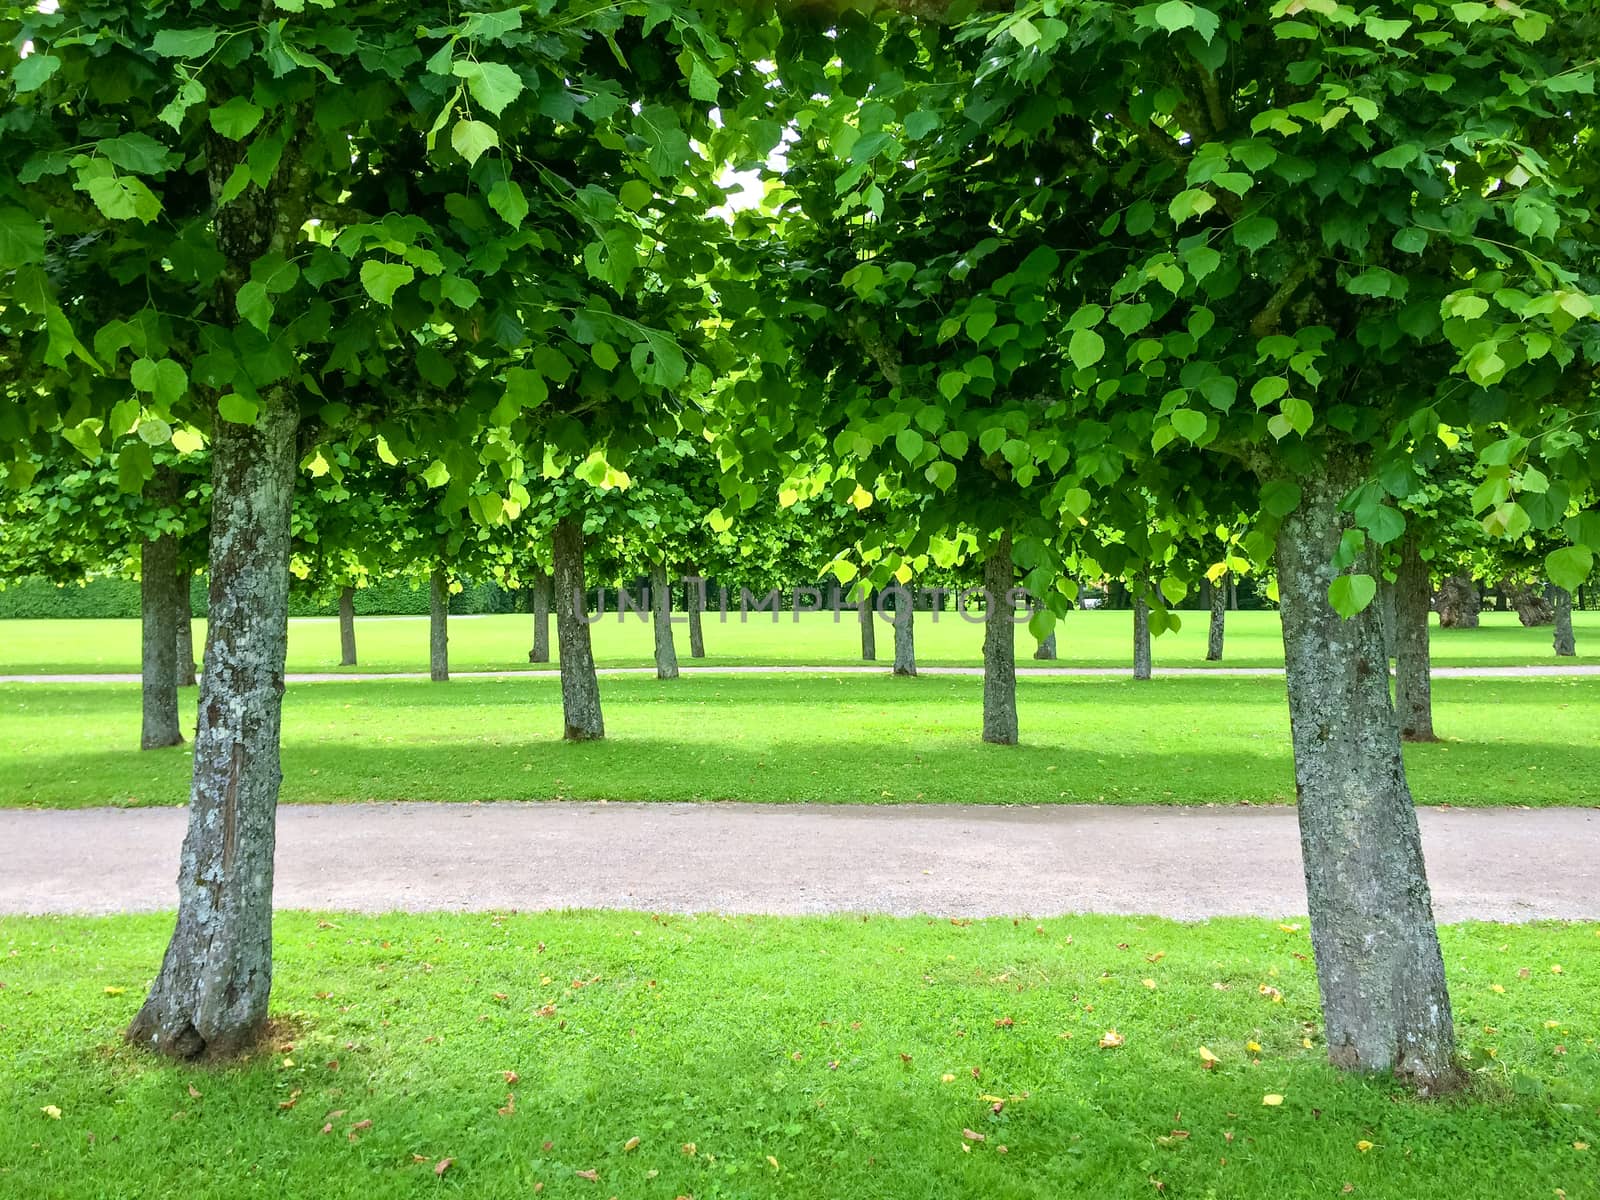 Alley of linden trees in a beautiful summer park.